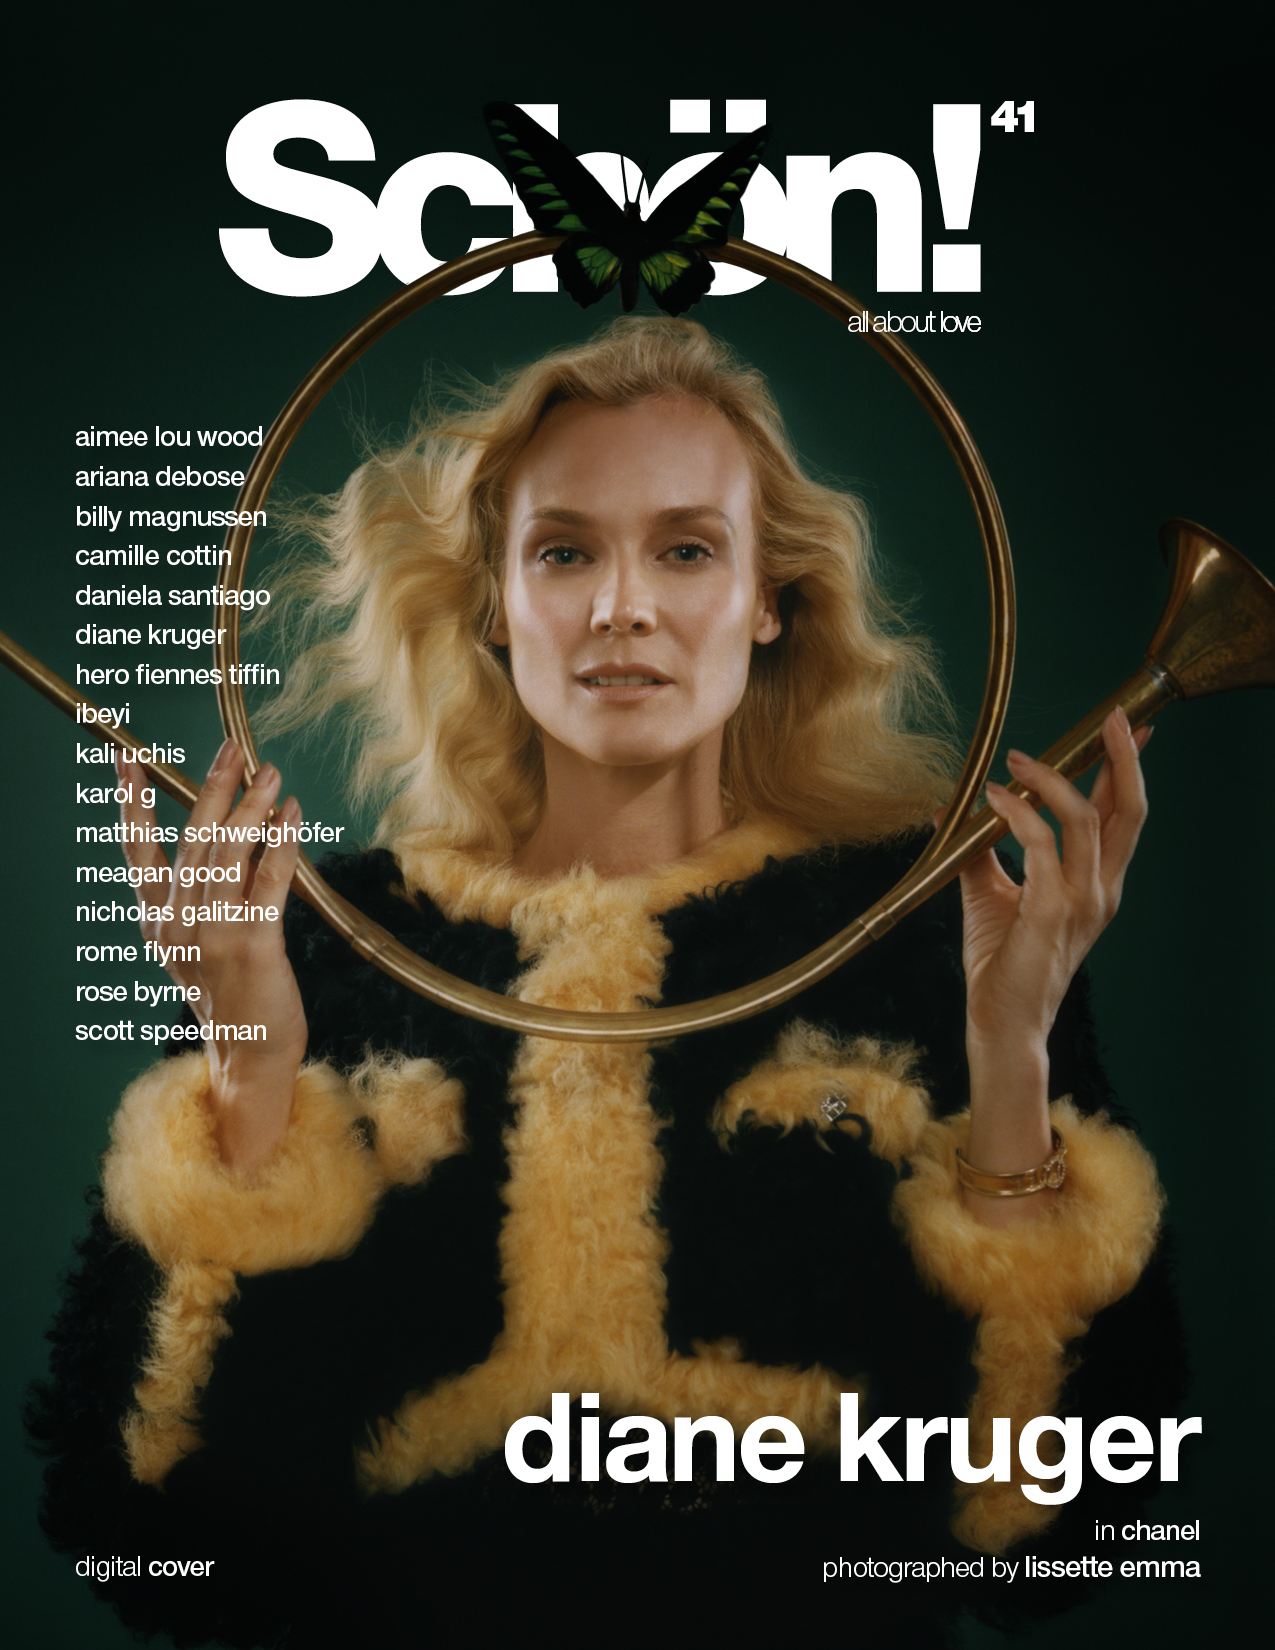 Diane Kruger talks teenage years as a model in Paris, The 355 and